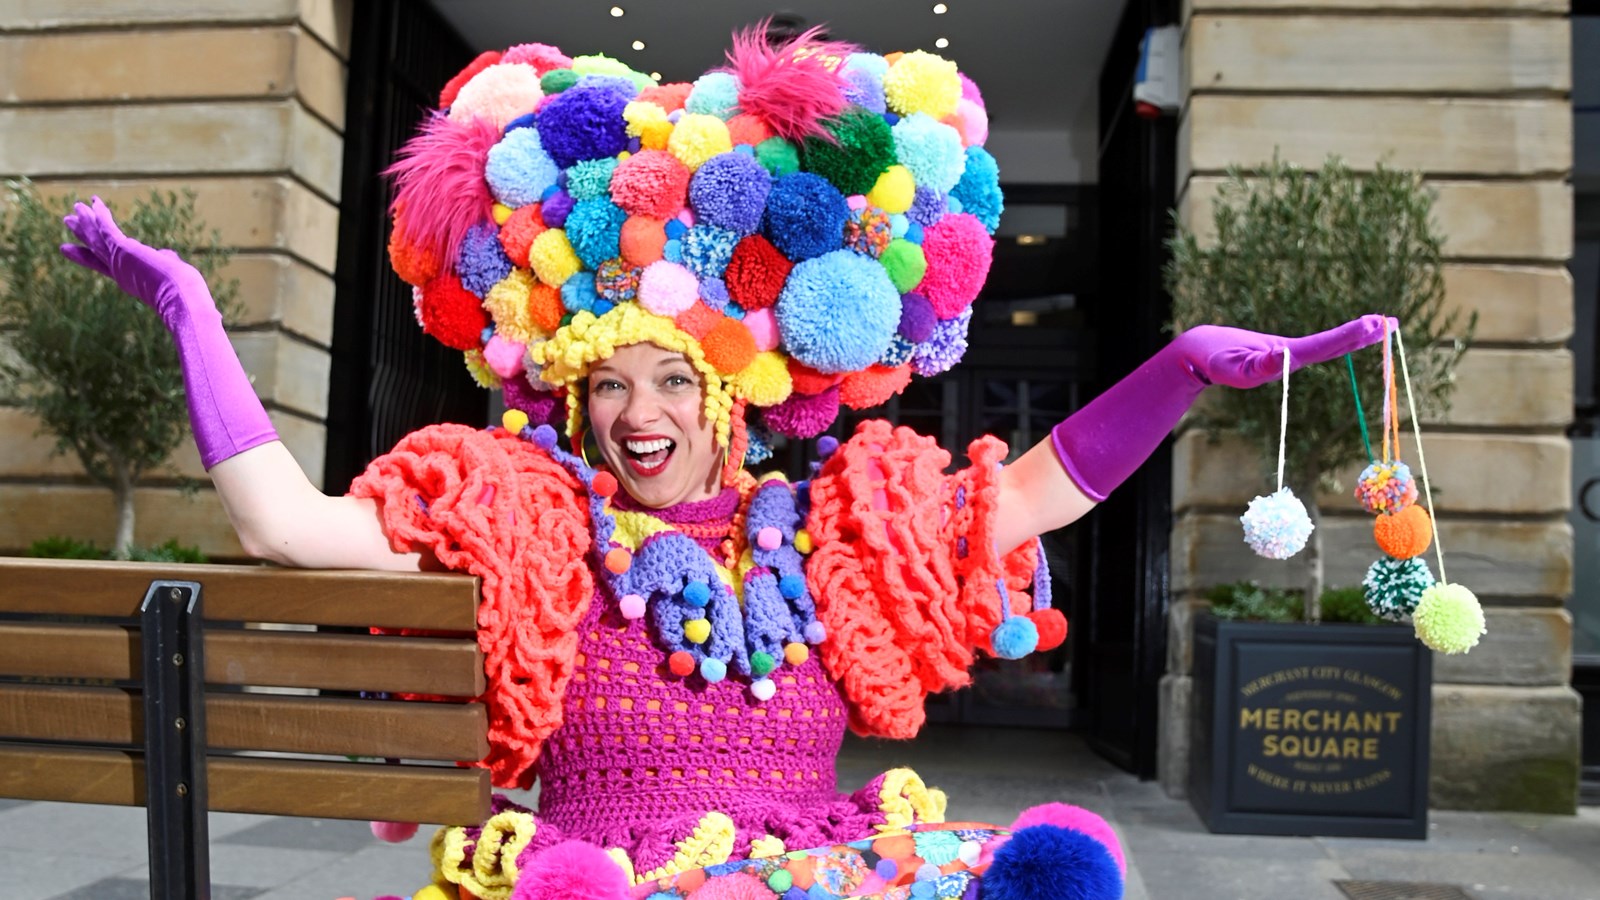 A performer wearing an outfit made of brightly coloured pom-poms sits on a bench in front of a sign which reads 'Merchant Square'